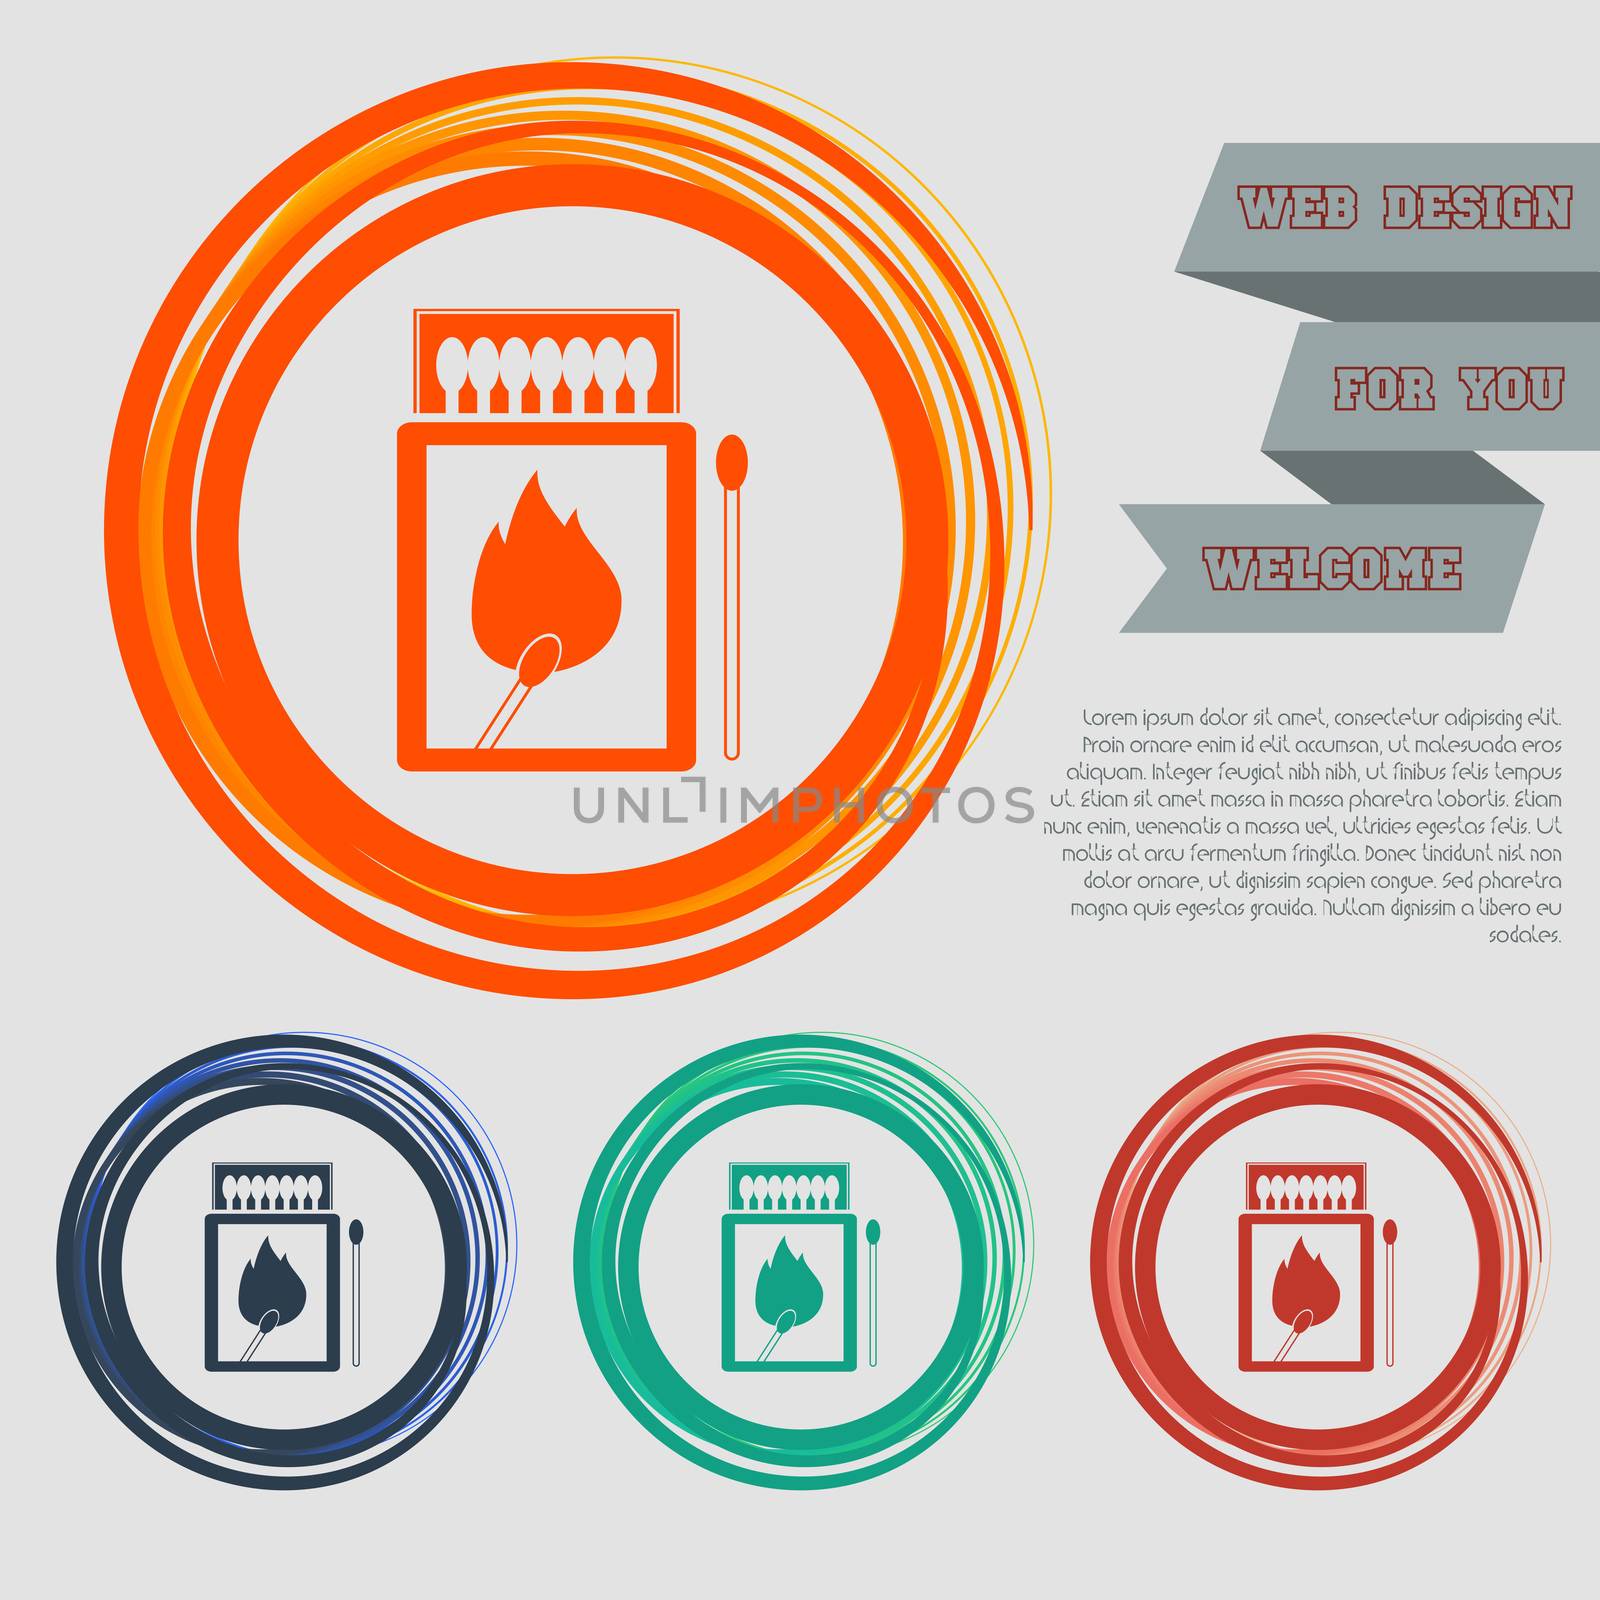 matchbox and matches icon on the red, blue, green, orange buttons for your website design with space text.  by Adamchuk